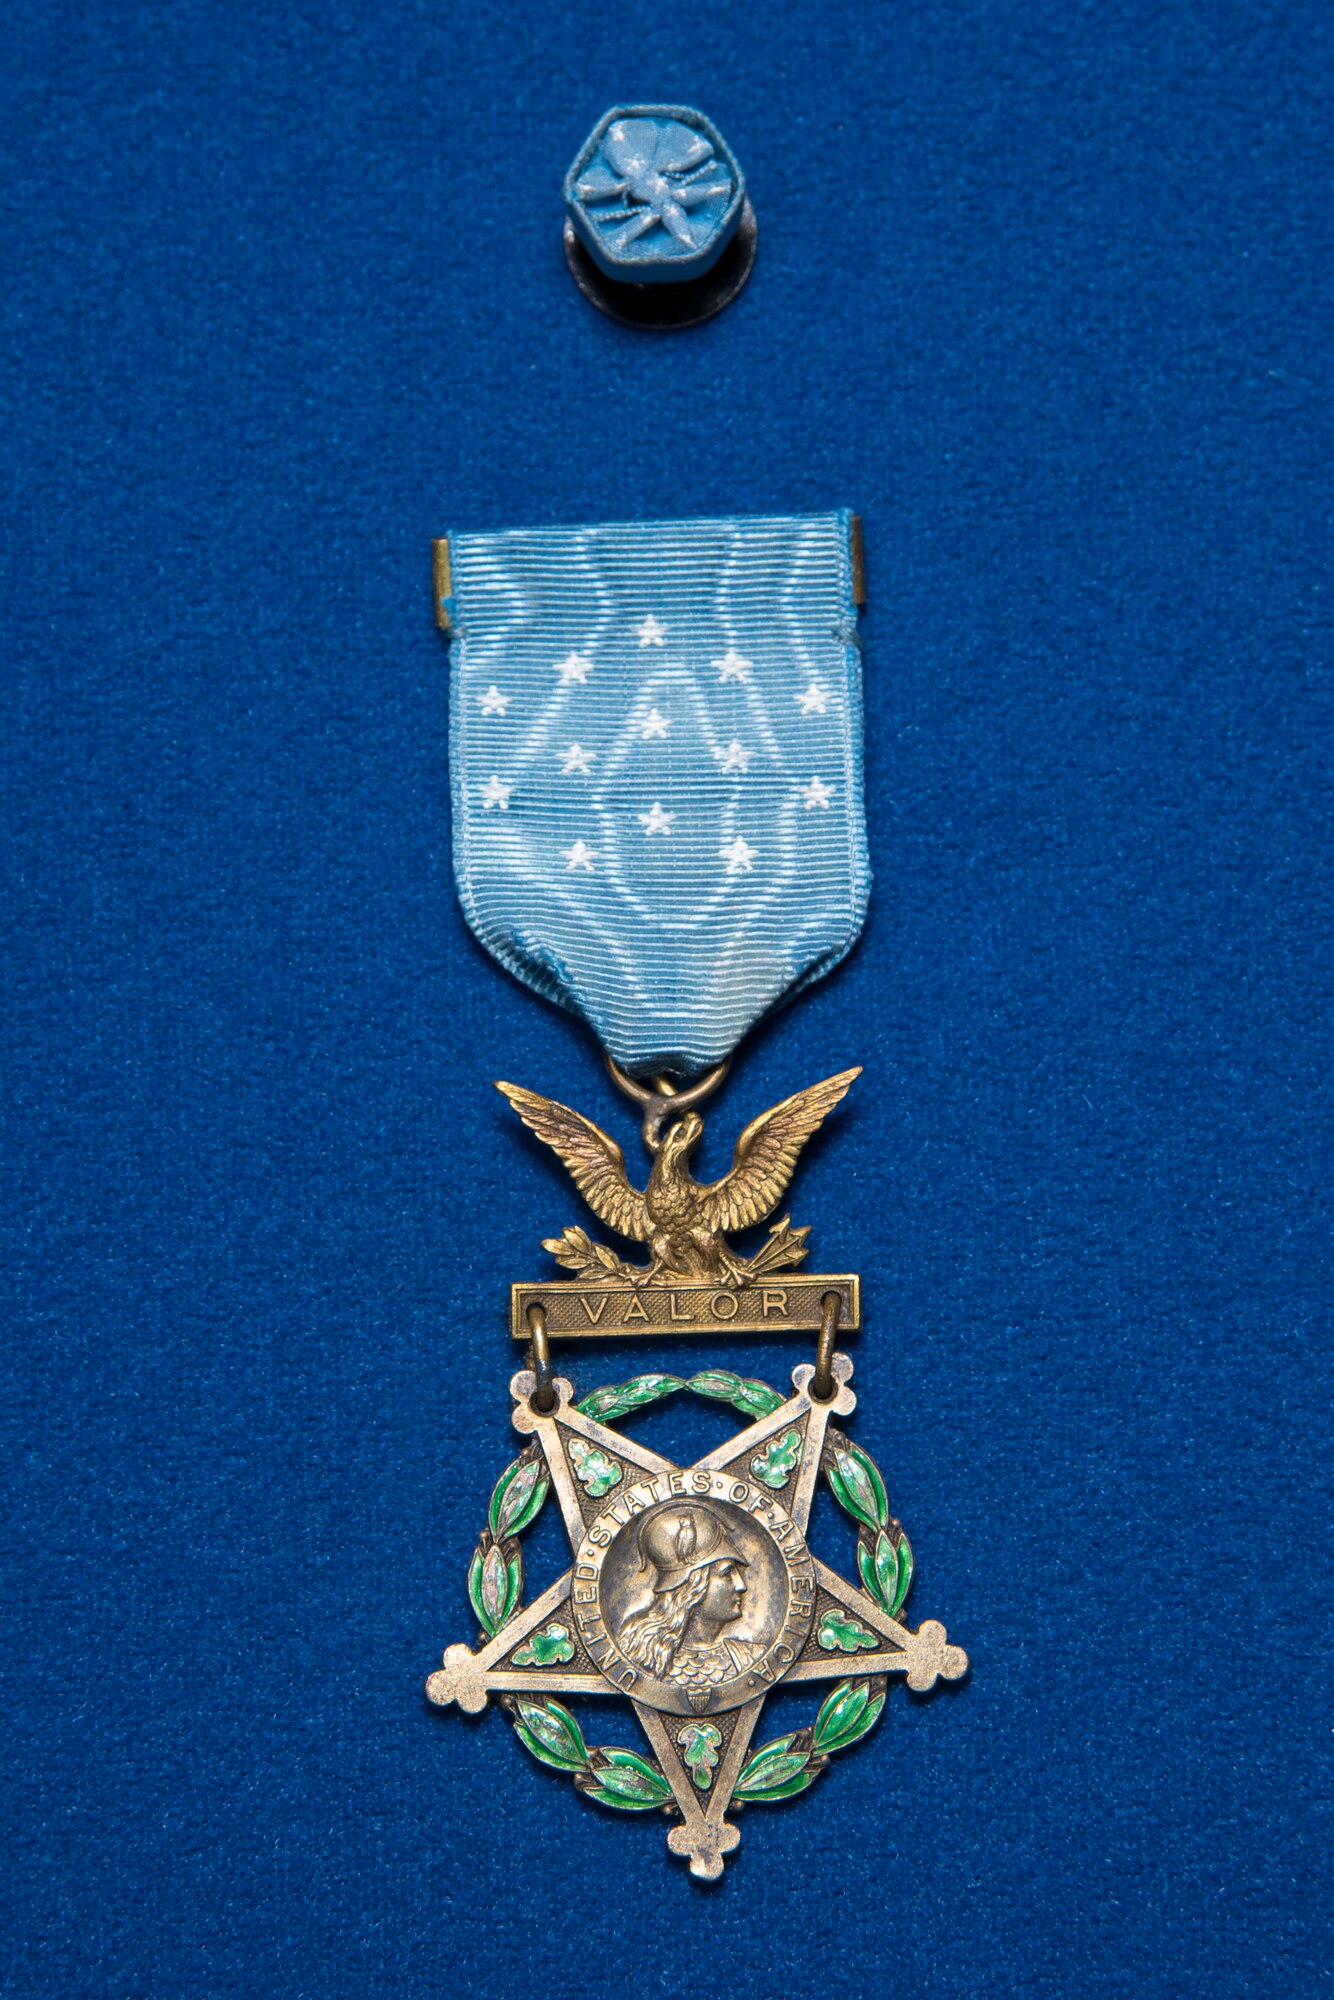 WWI pilot Lt. Harold E. Goettler Medal of Honor on display in the Early Years Gallery at the National Museum of the U.S. Air Force. (U.S. Air Force photo by Ken LaRock)